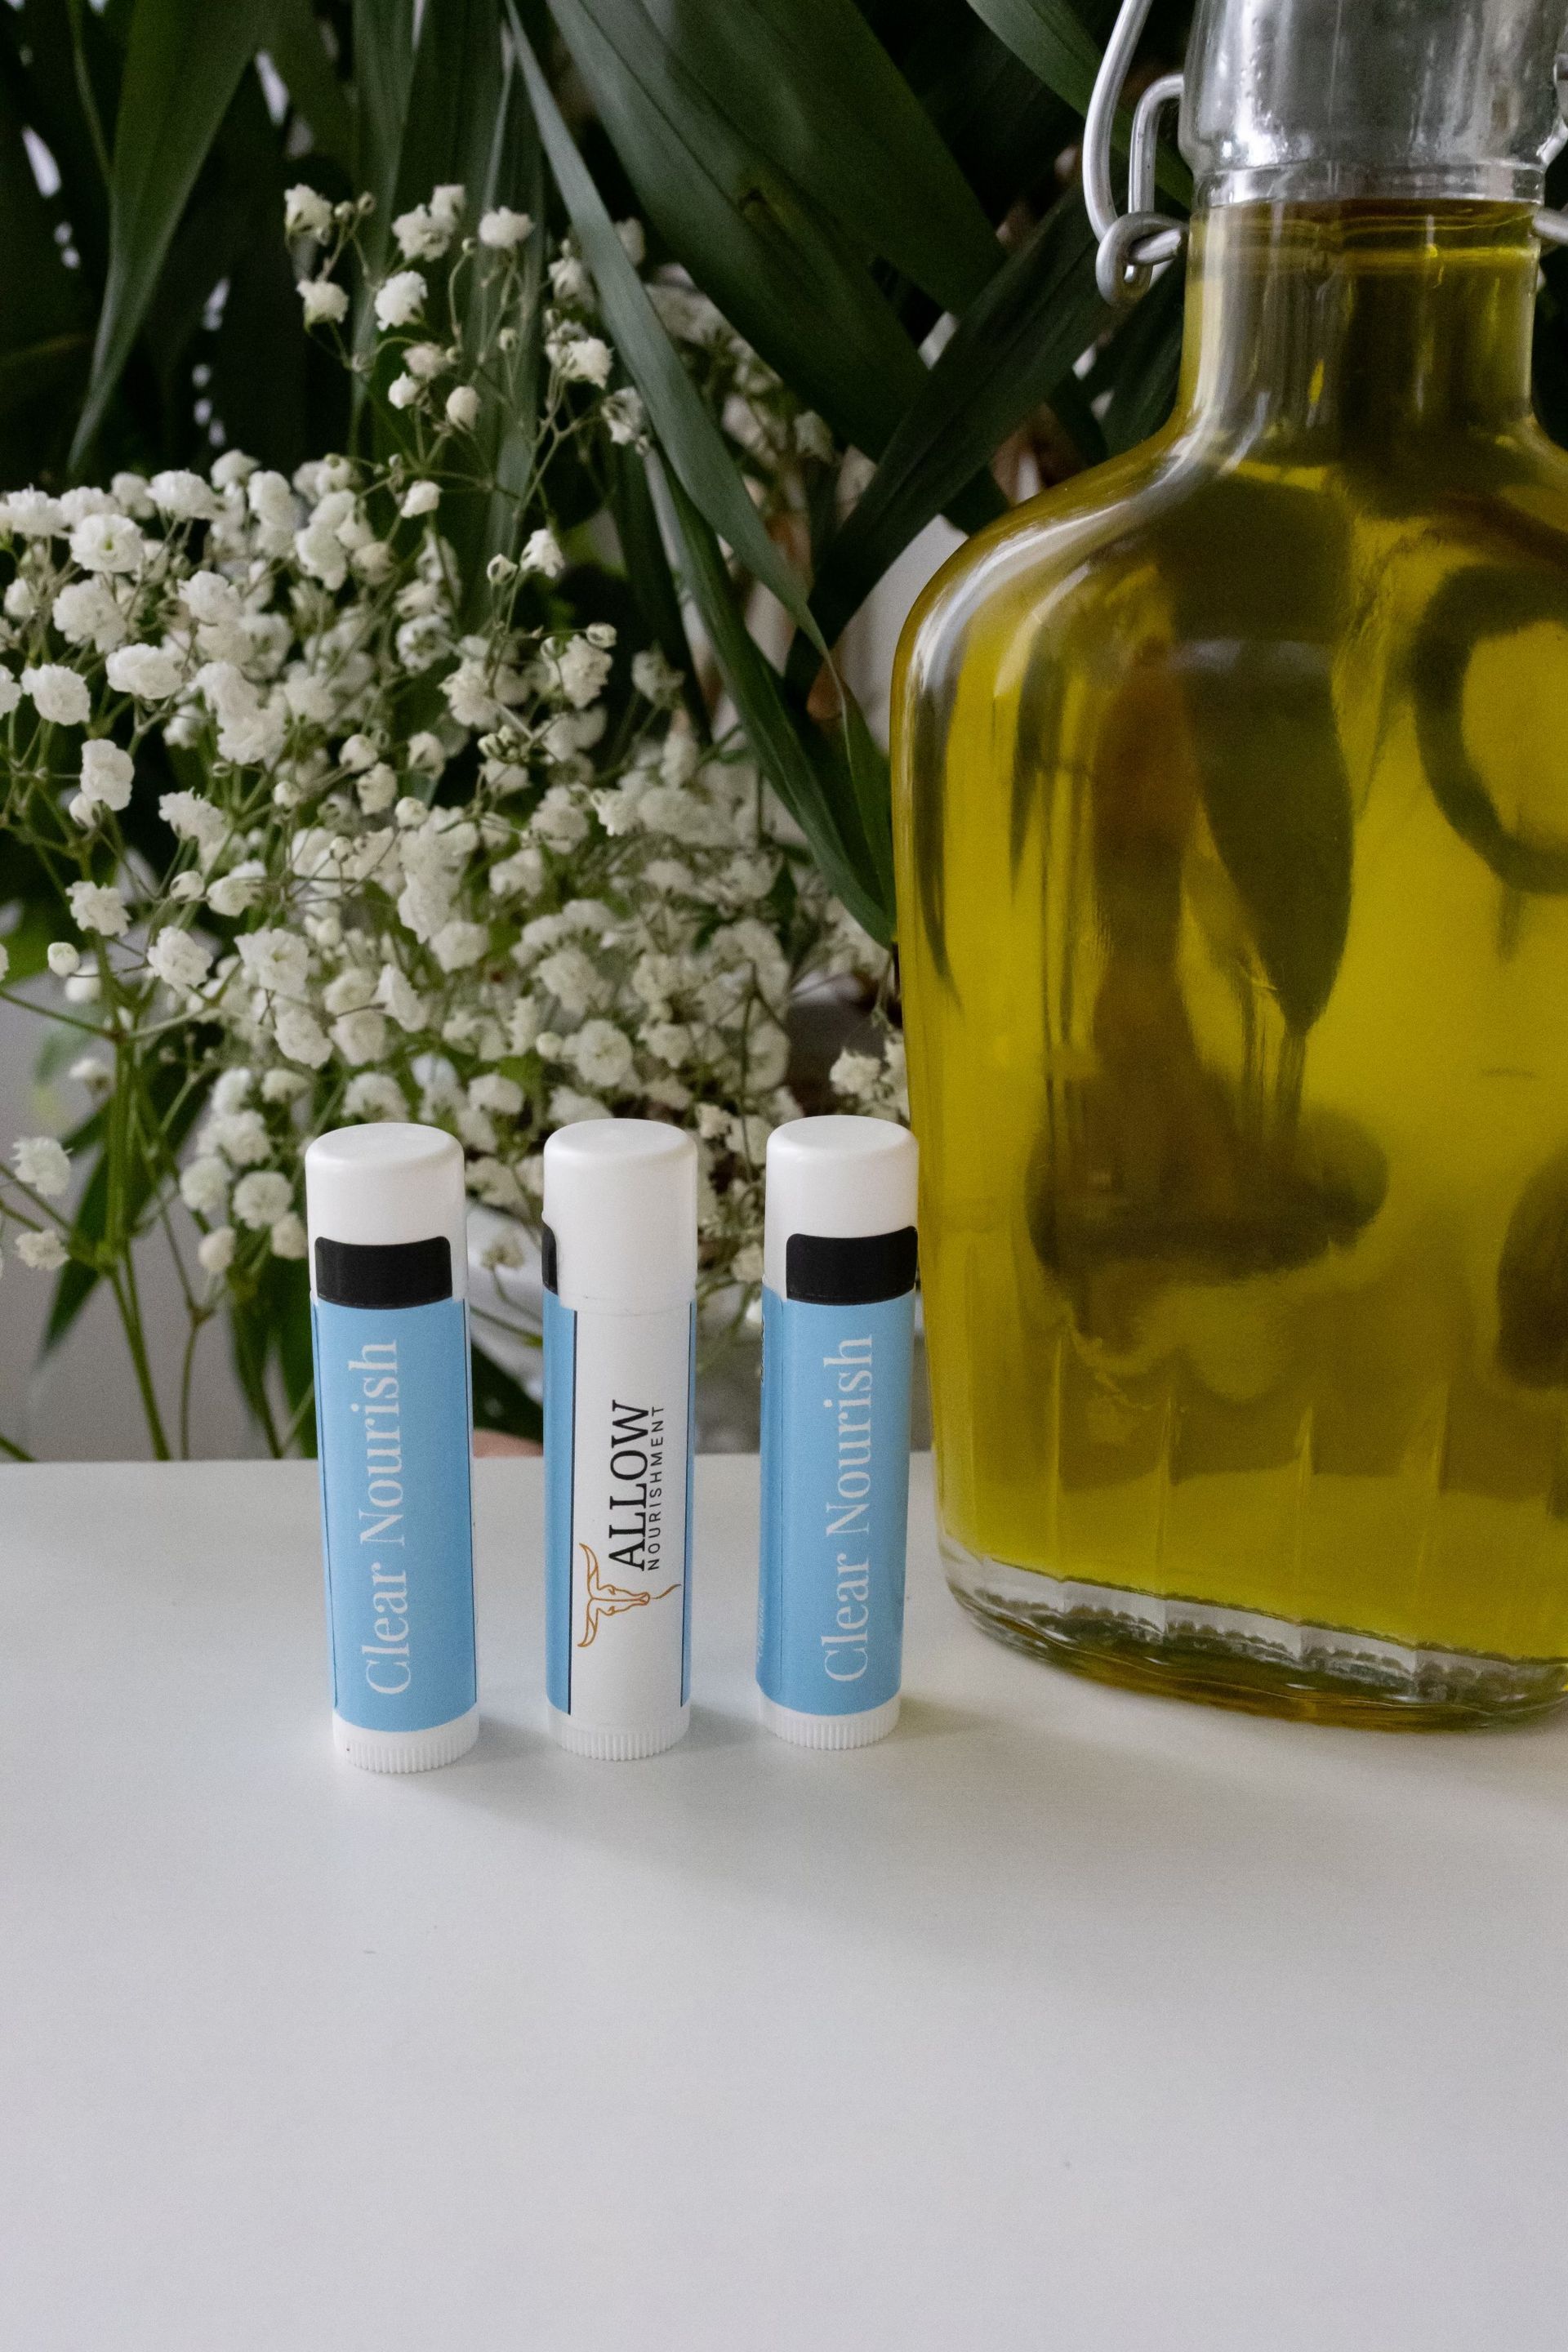 Three Allow Nourishment Tallow lip balms are sitting on a table next to a bottle of olive oil.